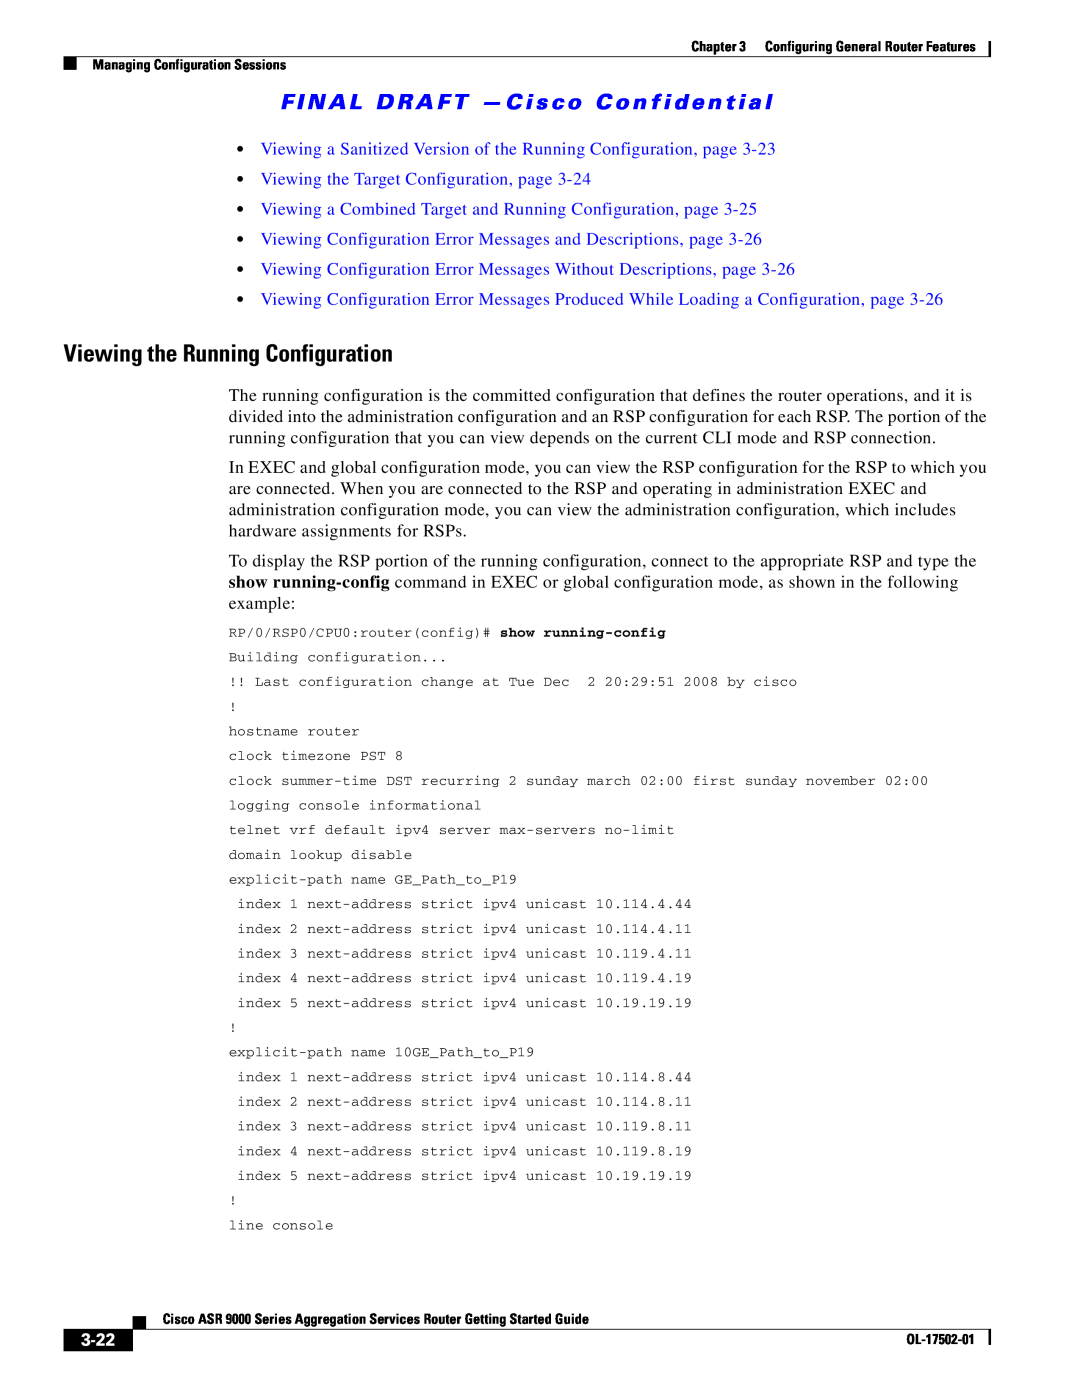 Cisco Systems A9K24X10GETR, ASR 9000 manual Viewing the Running Configuration, Viewing the Target Configuration, page, 3-22 